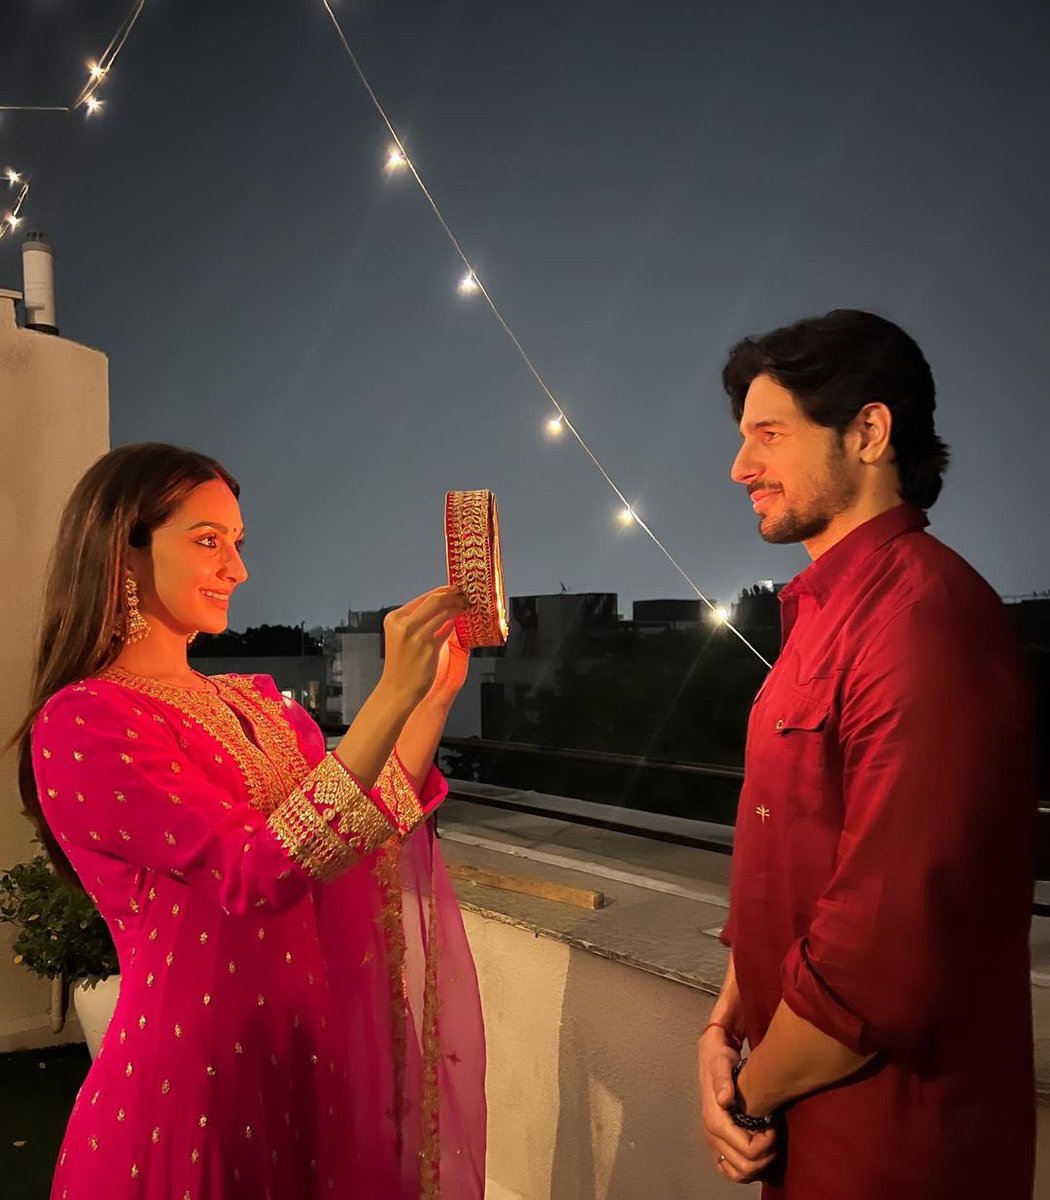 Celebrating the beauty of love and tradition on this special #KarvaChauth. 💖🌕 May the bond between couples grow stronger with each passing day.

 #SidKiara #LoveAndTradition 

🙏🏻🌟